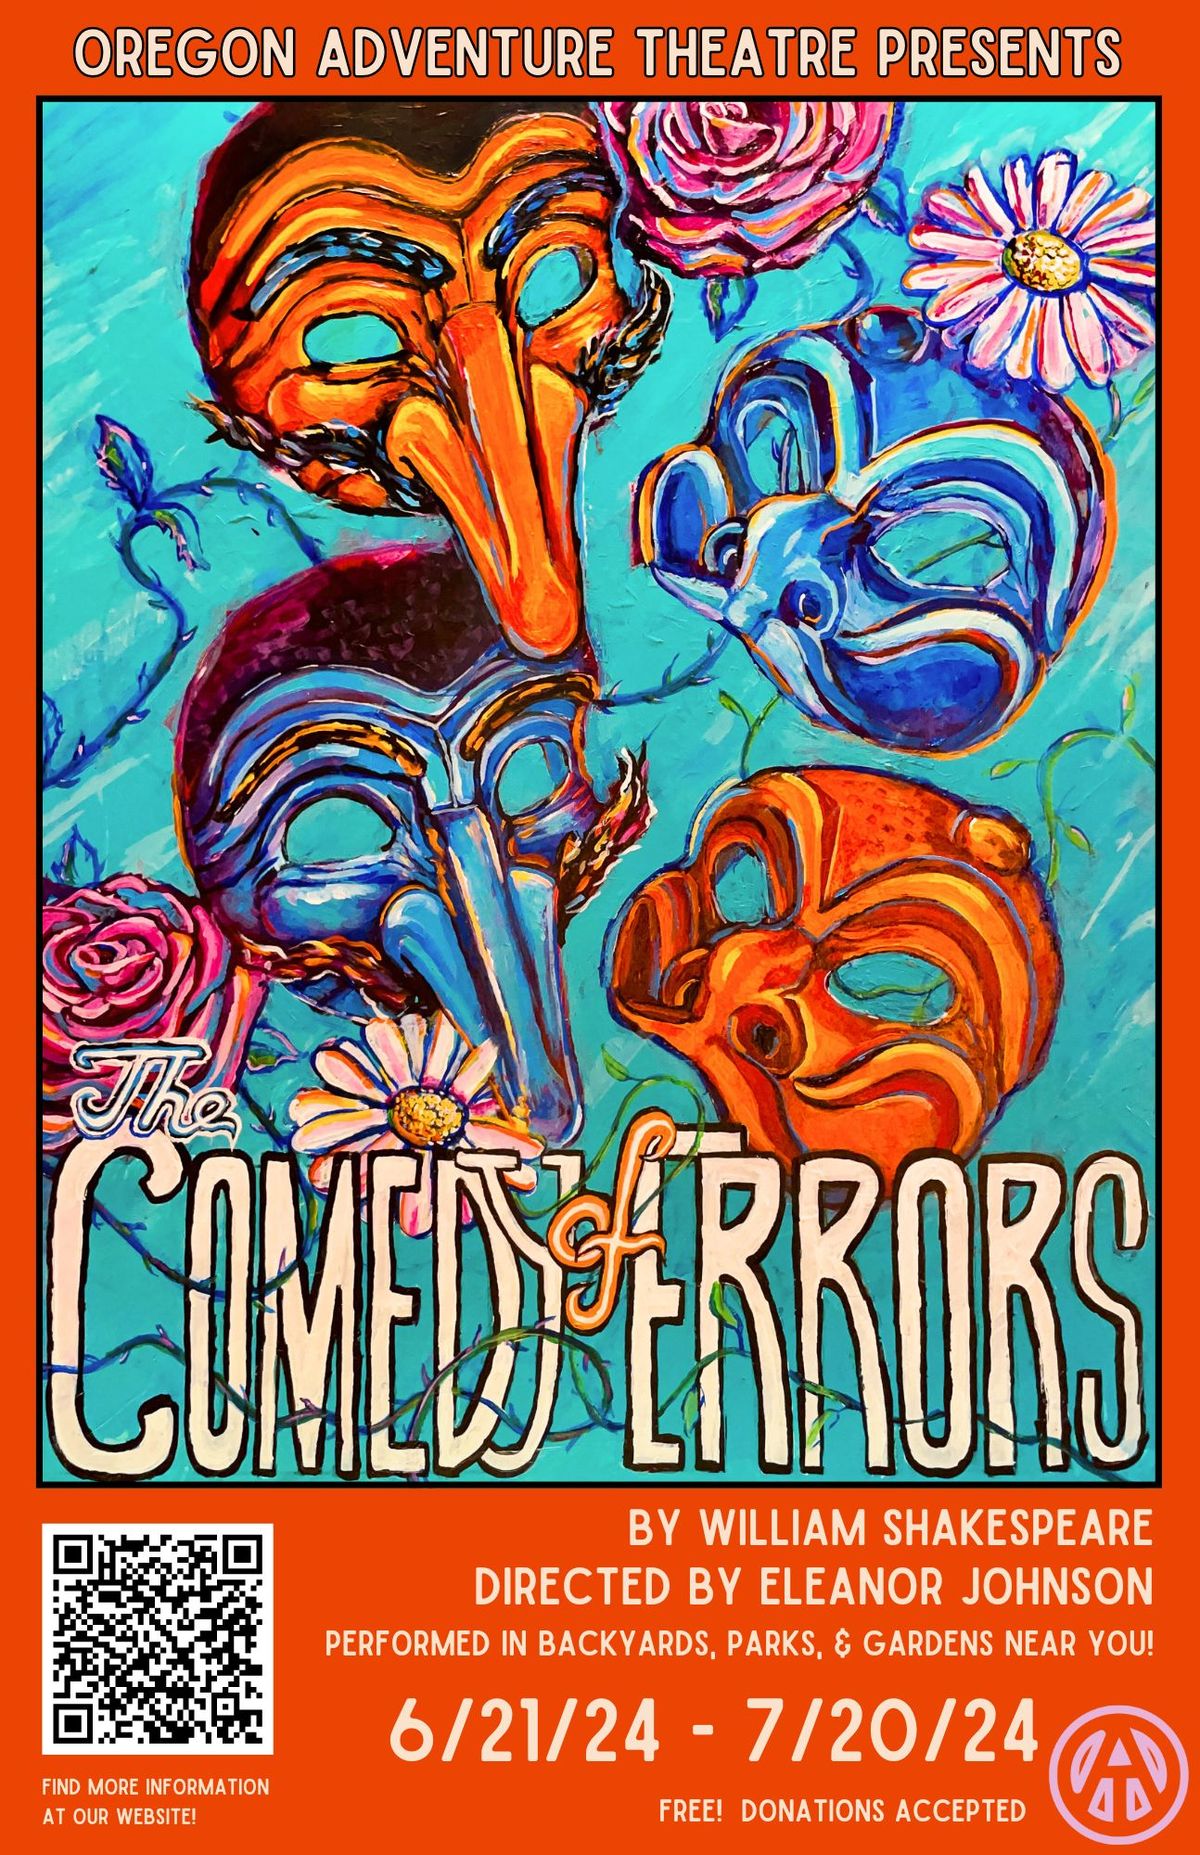 Weekend 4: Show 9- Comedy of Errors